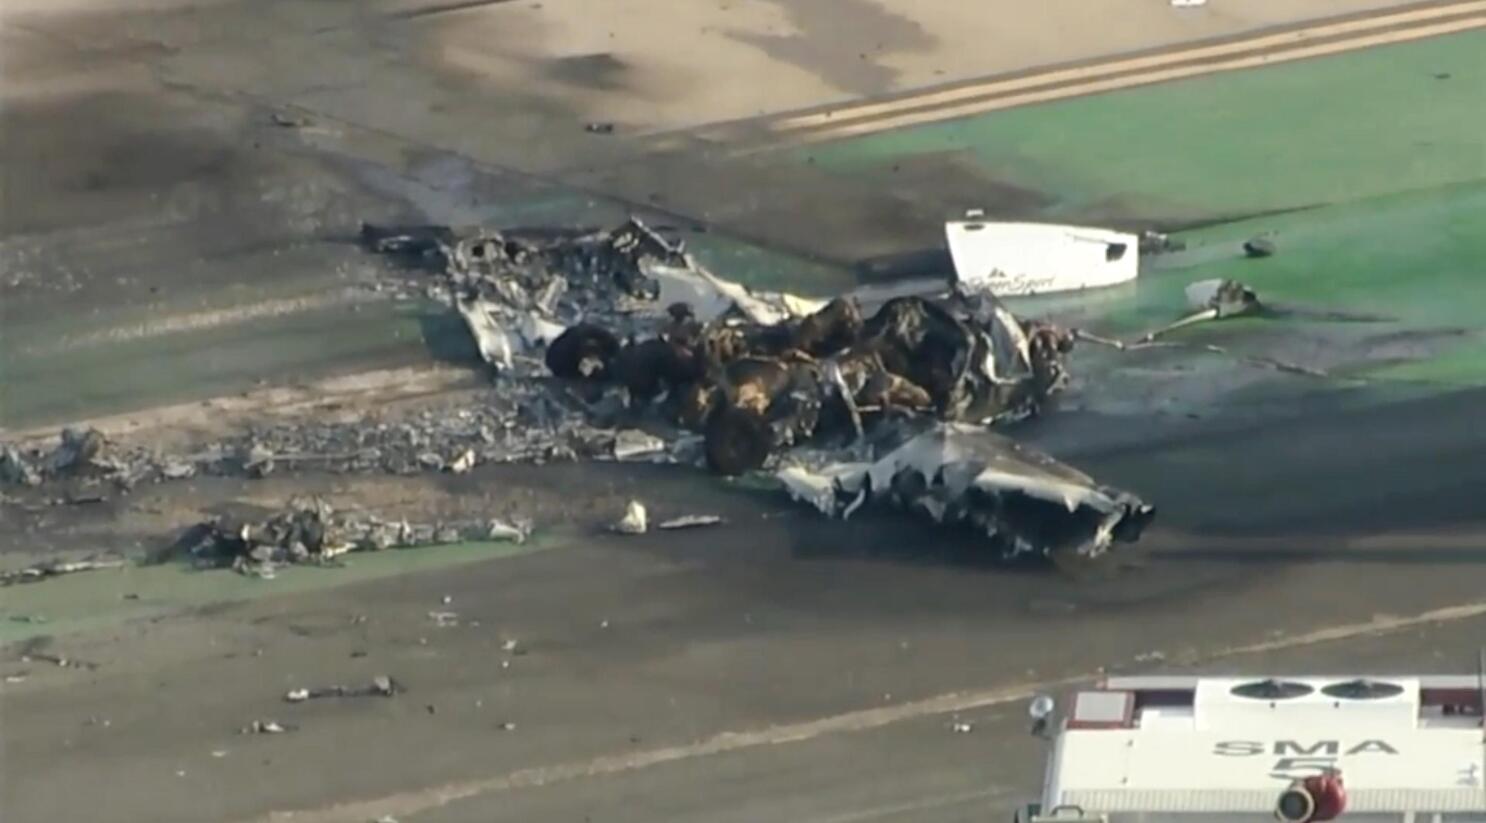 Report: Plane landed hard, then climbed again before crash